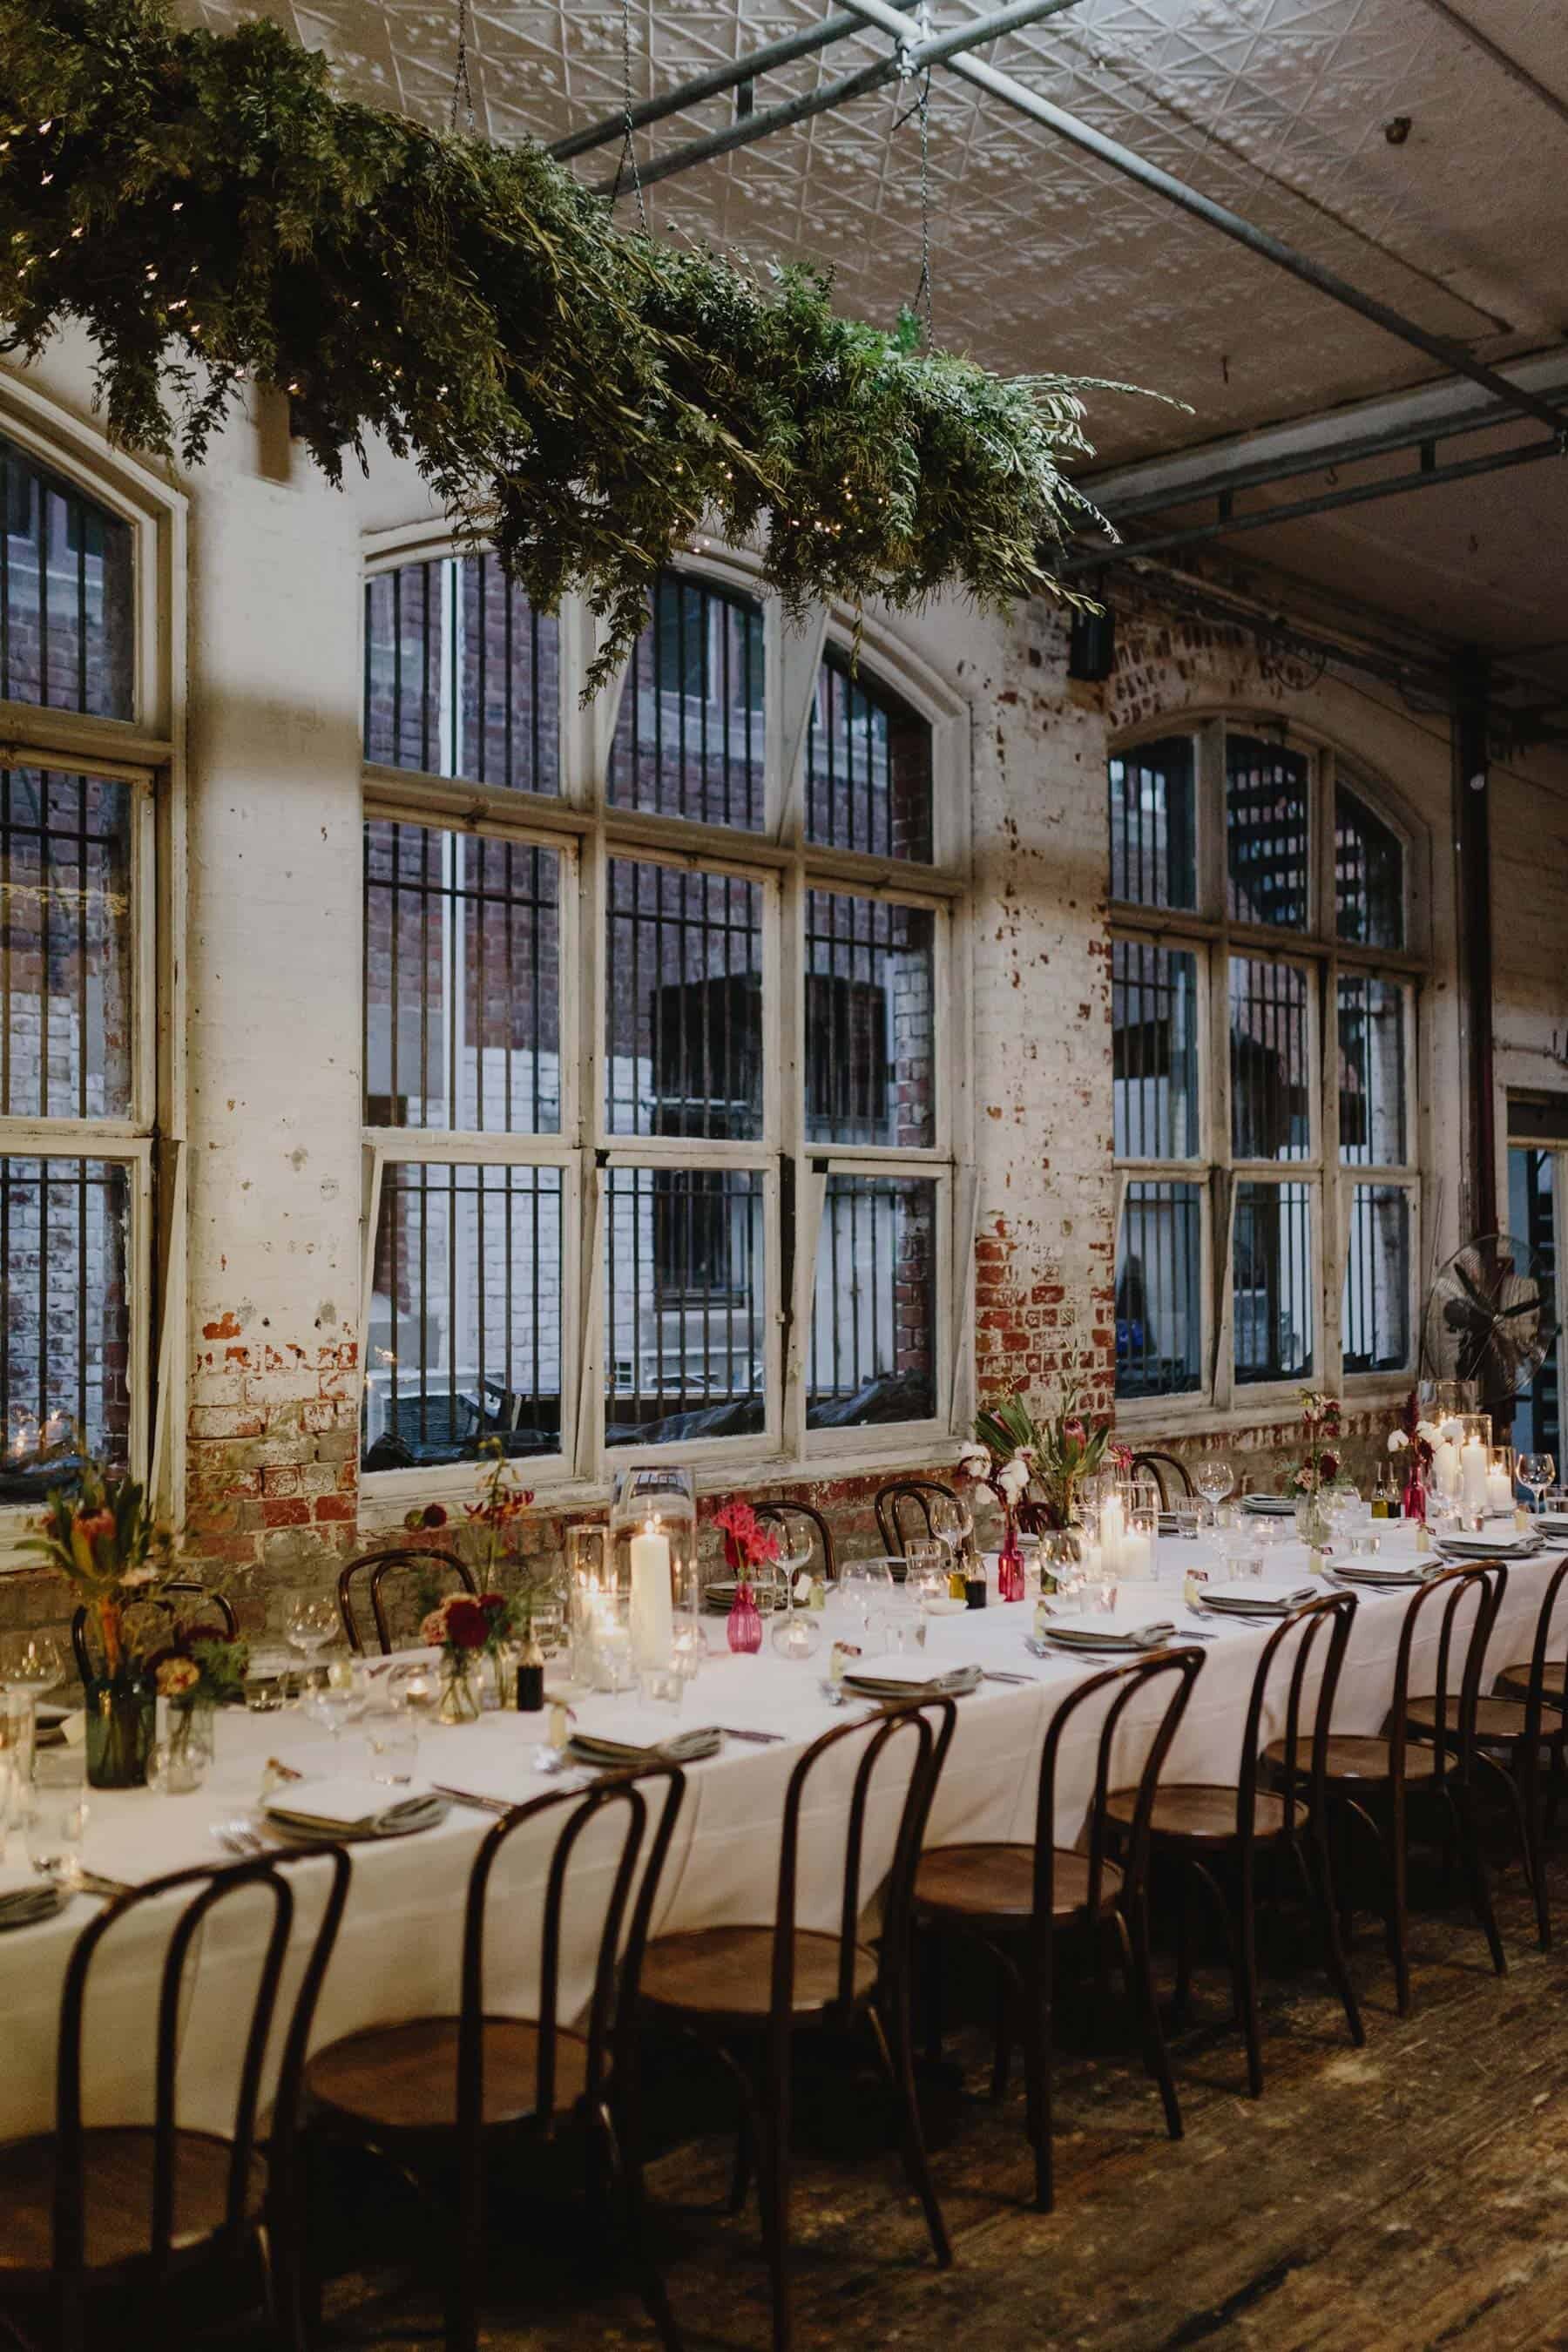 Melbourne warehouse wedding at Fortyfive Downstairs / Long Way Home Photography